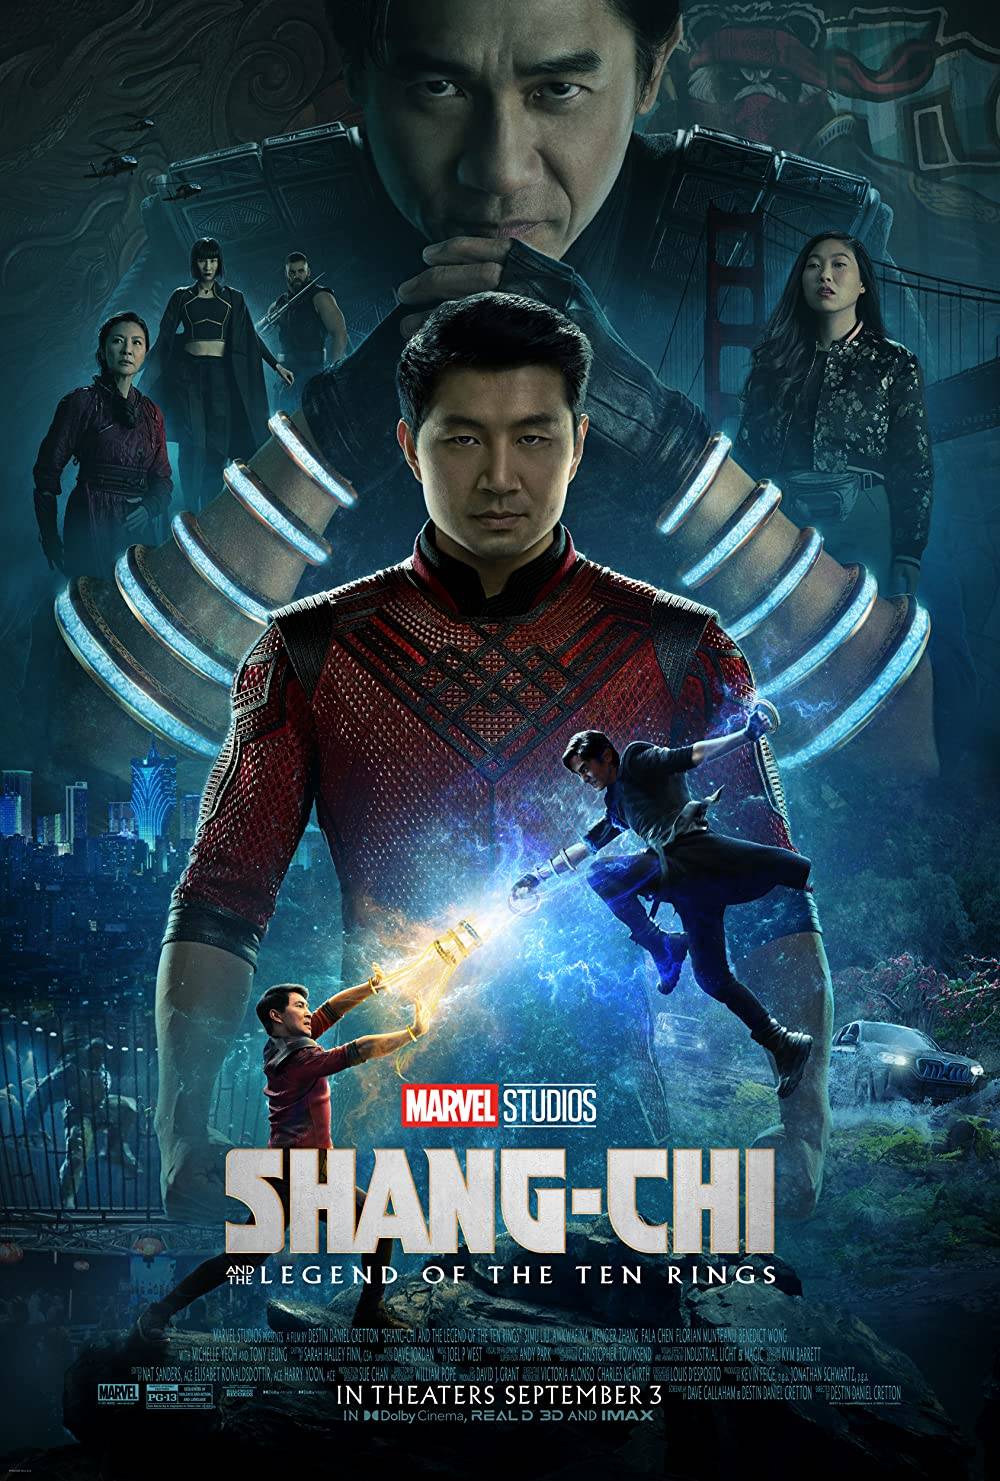 Shang Chi movie official poster posted by darren yaw malaysia website